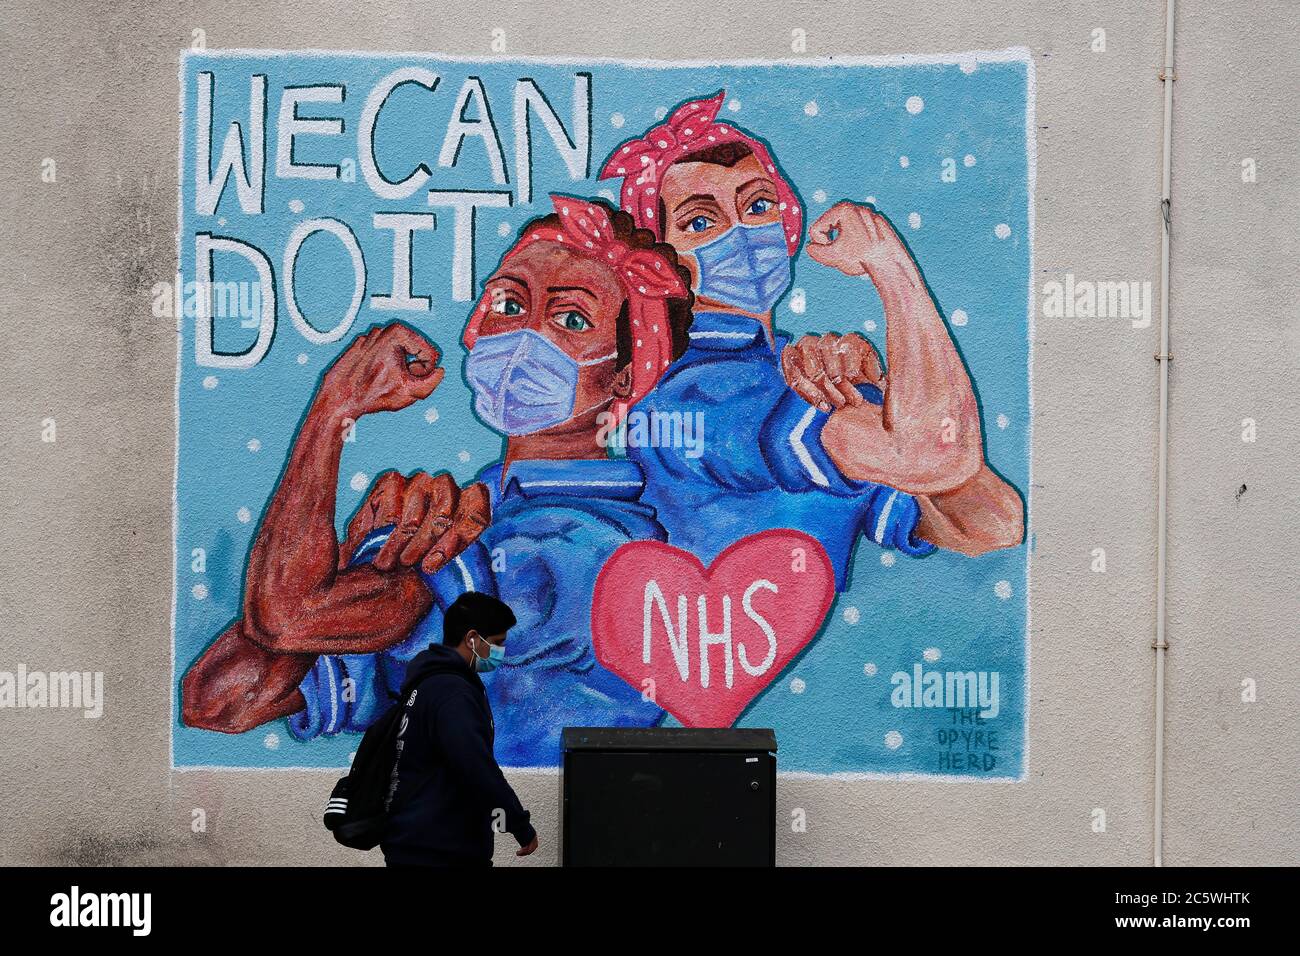 Loughborough, Leicestershire, UK. 5th July 2020. A man walks past a mural paying tribute to the National Health Service on its 72nd anniversary during the coronavirus pandemic. Credit Darren Staples/Alamy Live News. Stock Photo